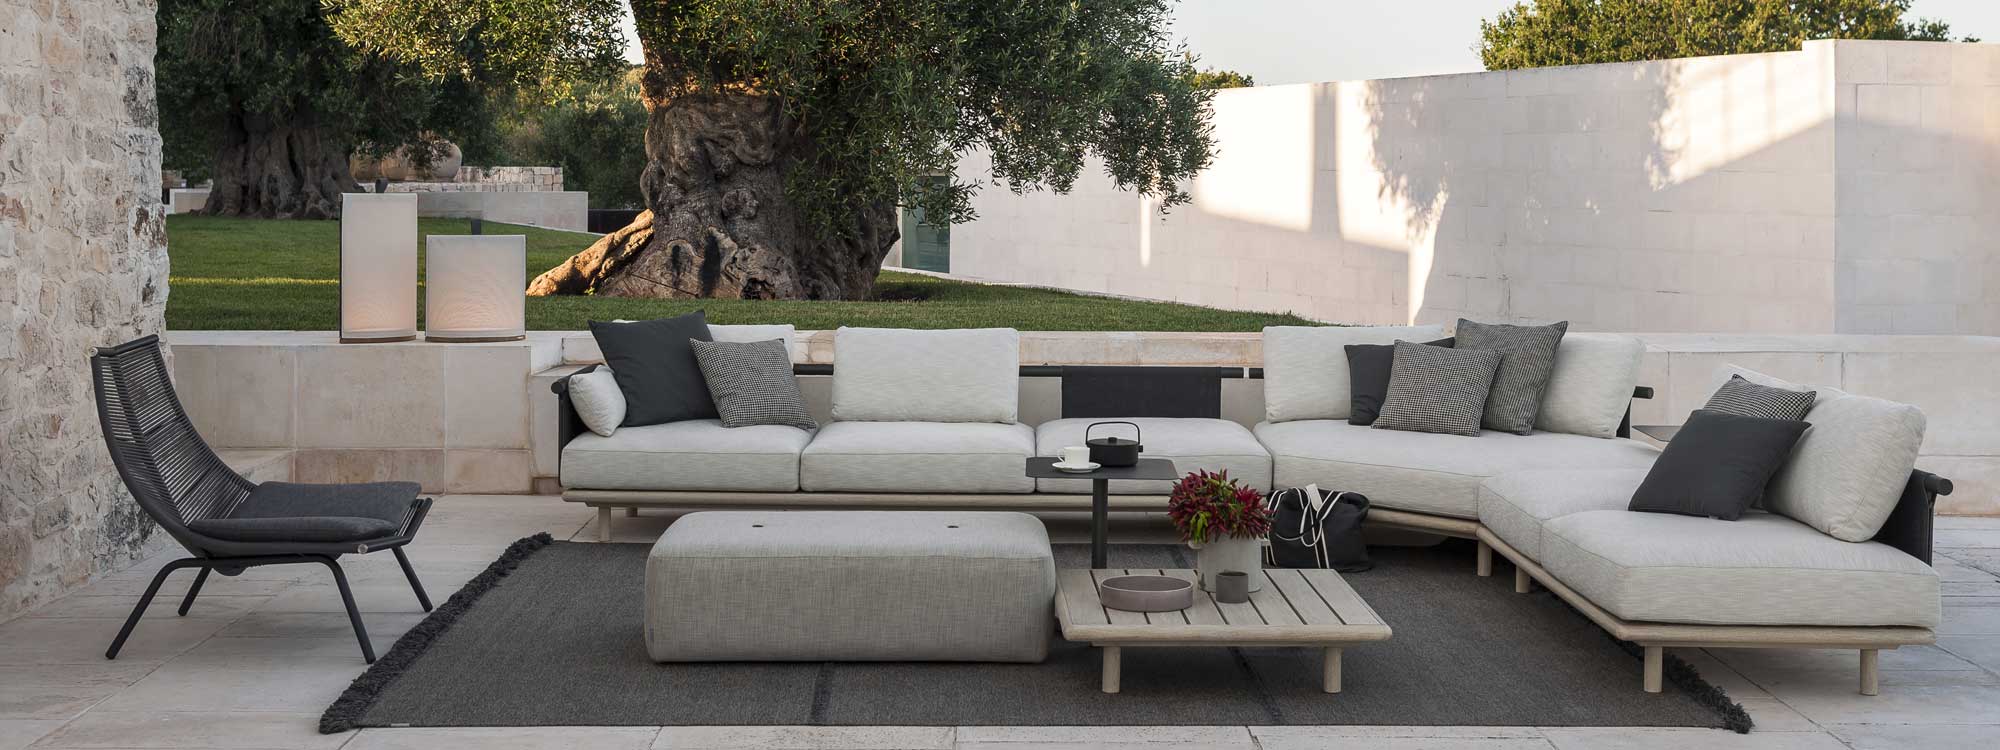 Image of RODA Eden garden corner sofa with hexagonal corner unit, on white-washed terrace with lawn and ancient olive tree in the background